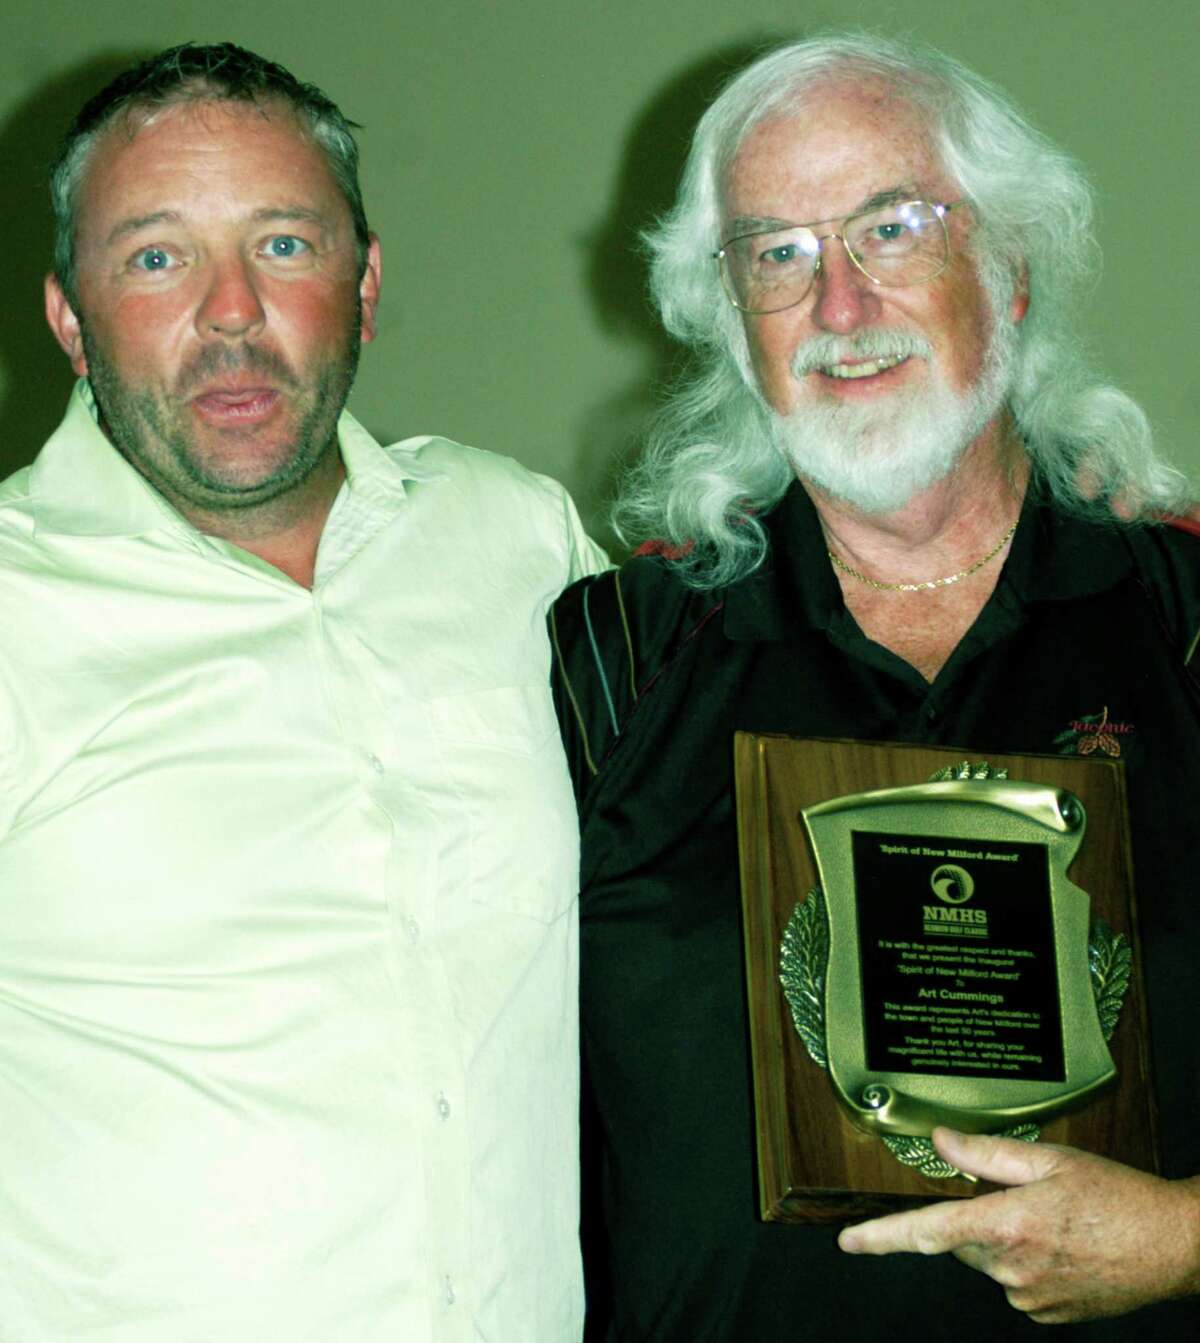 Steve Byrne, left, director of the New Miilford High School Reunion Classic golf tournament, poses with Art Cummings, the event's inaugural “Spirit of New Milford” award recipient in tribute to his longtime community contributions.